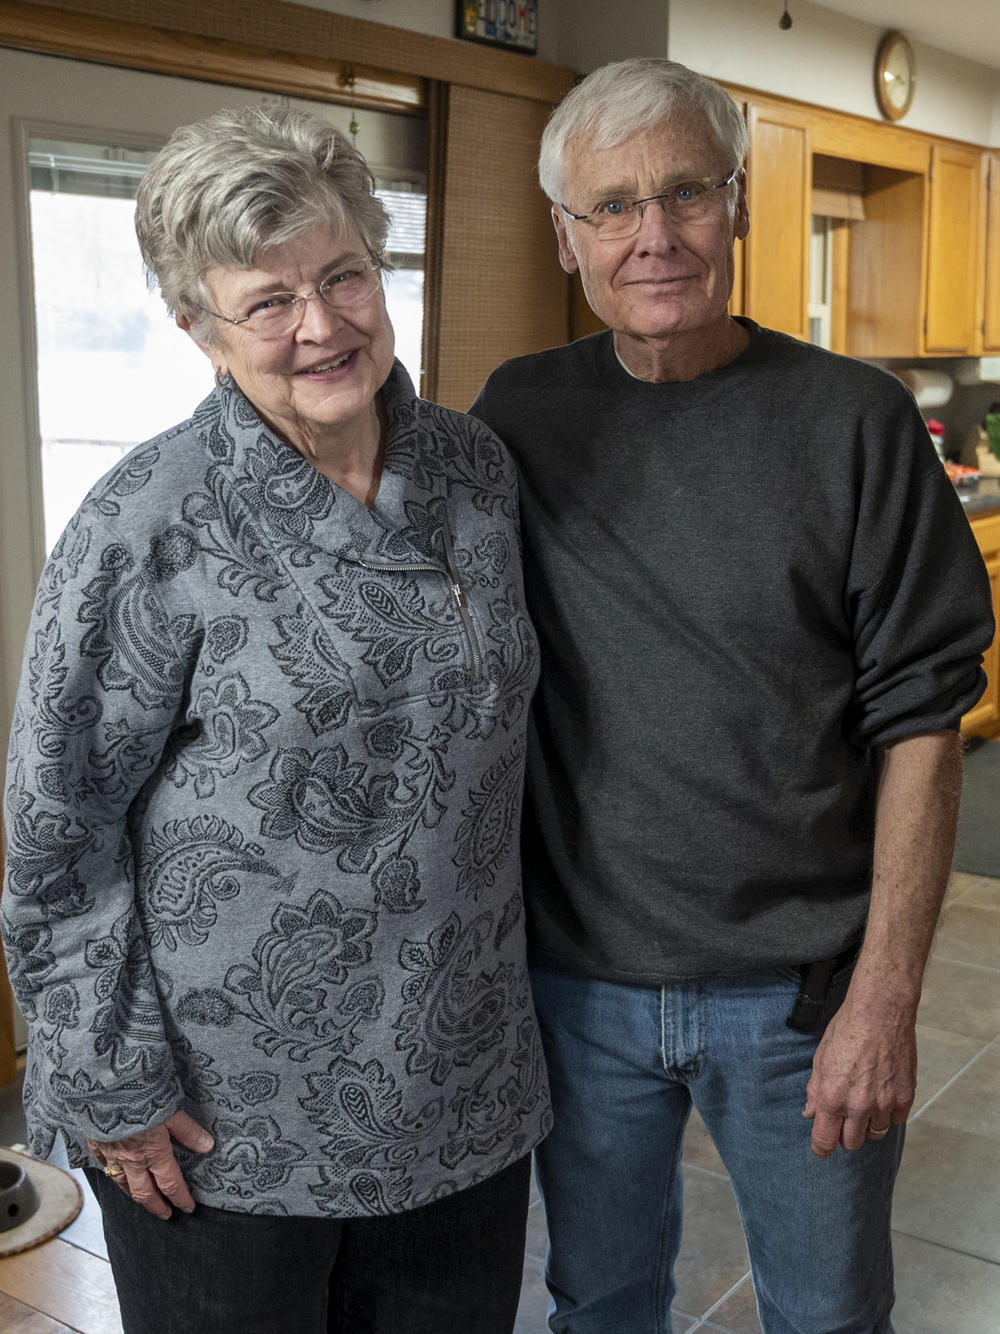 Don and Laurita Miller say they've spent more time caring for their 36-year-old son, Jon, in recent months due to a shortage of home health aides.